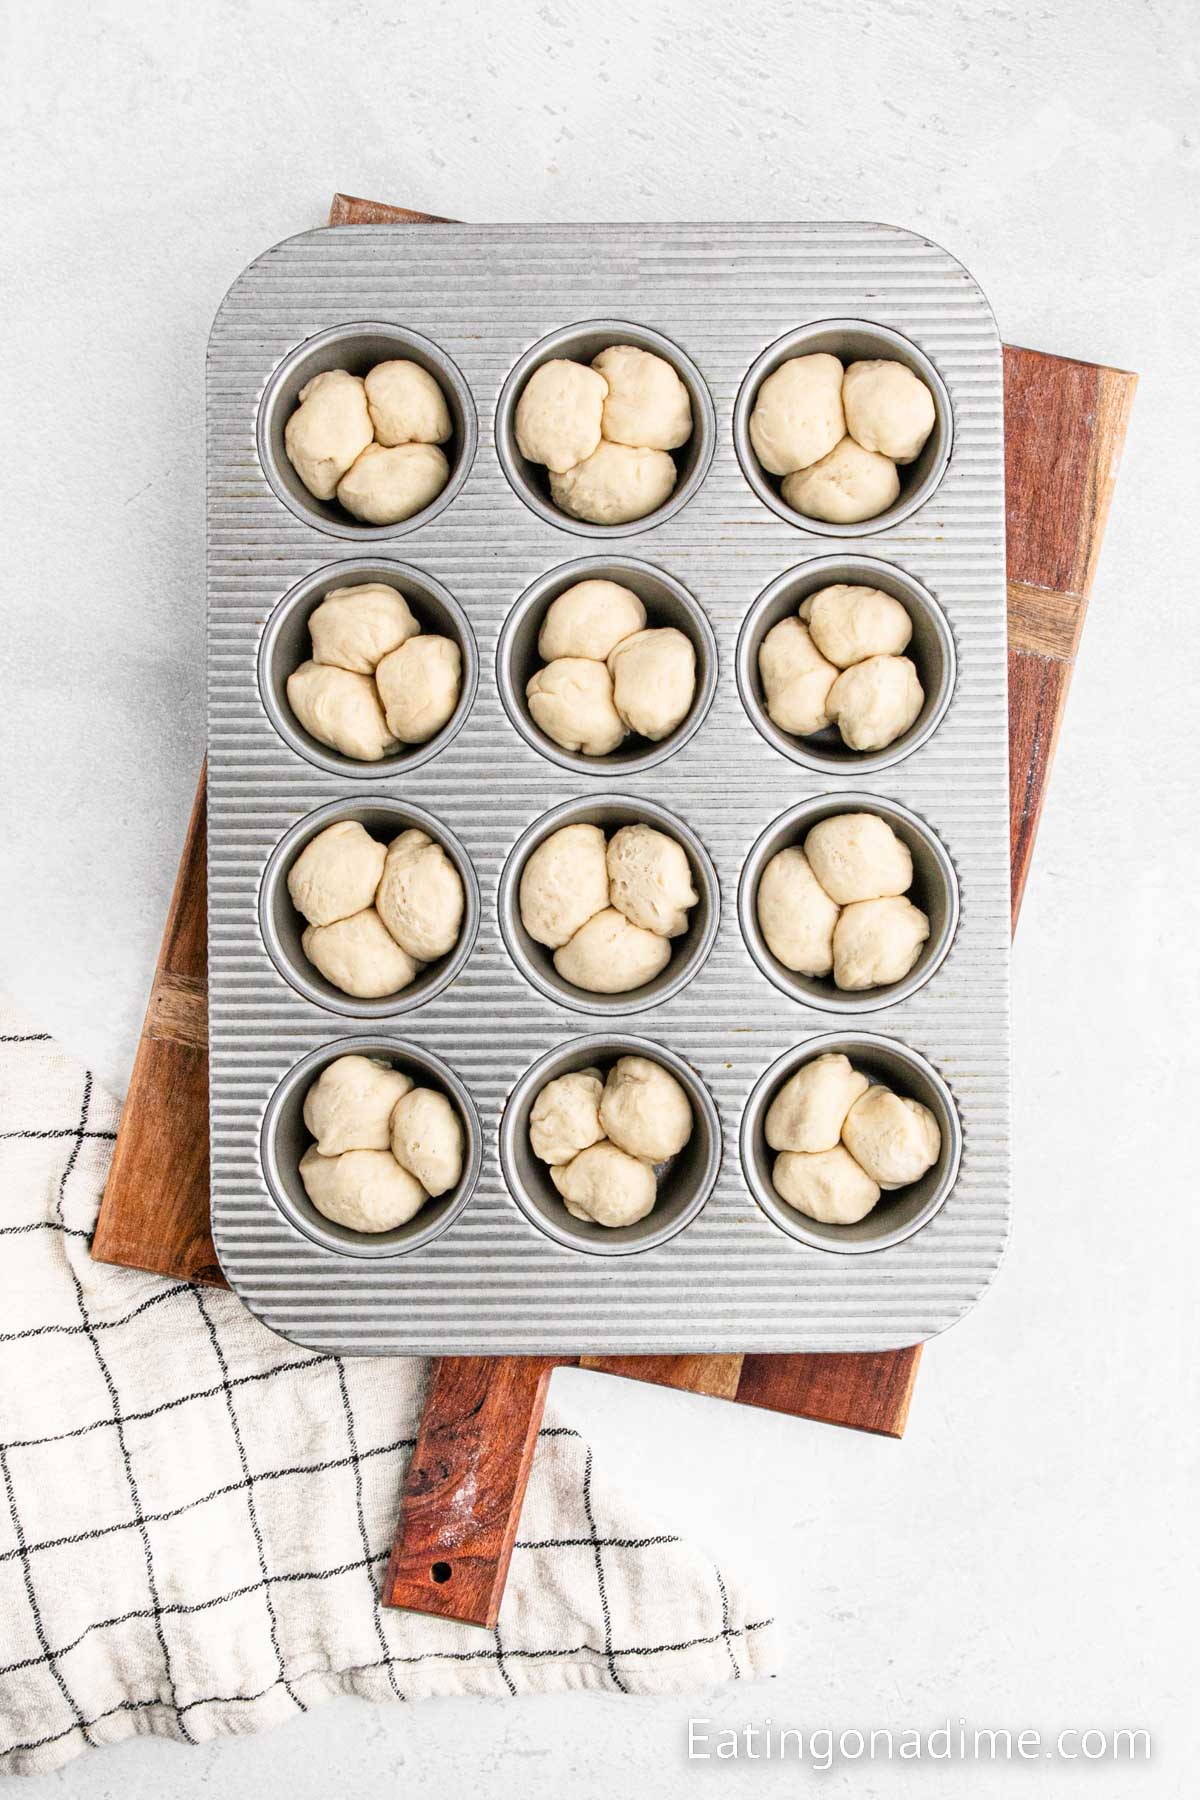 Placing the dough balls in a muffin tin